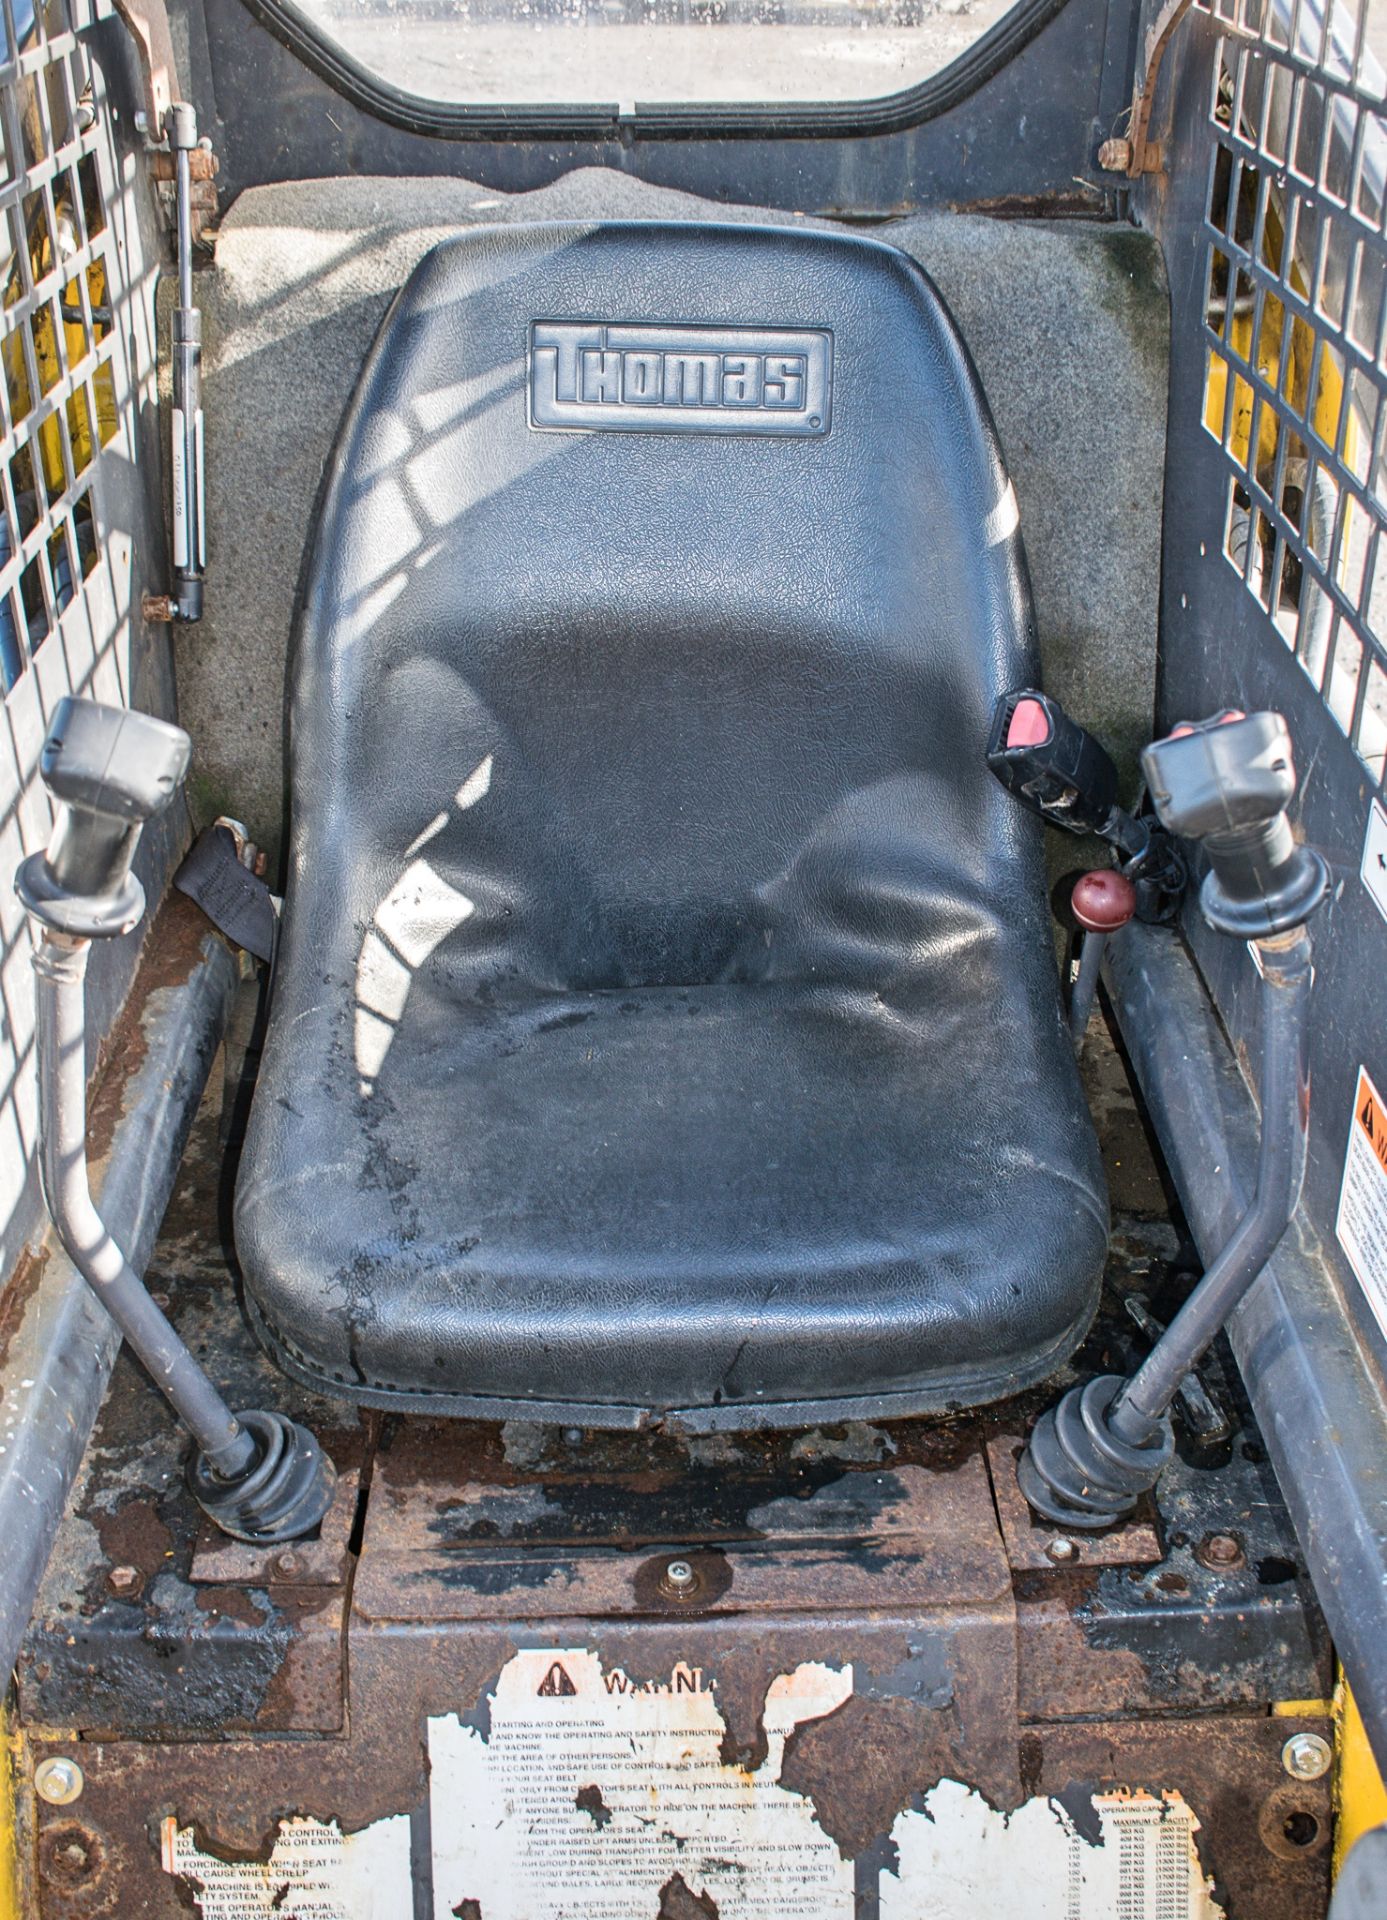 Thomas 105 skid steer loader Year: 2010 S/N: LC100BCE/2008 Recorded Hours: 1319 S7247 - Bild 11 aus 12